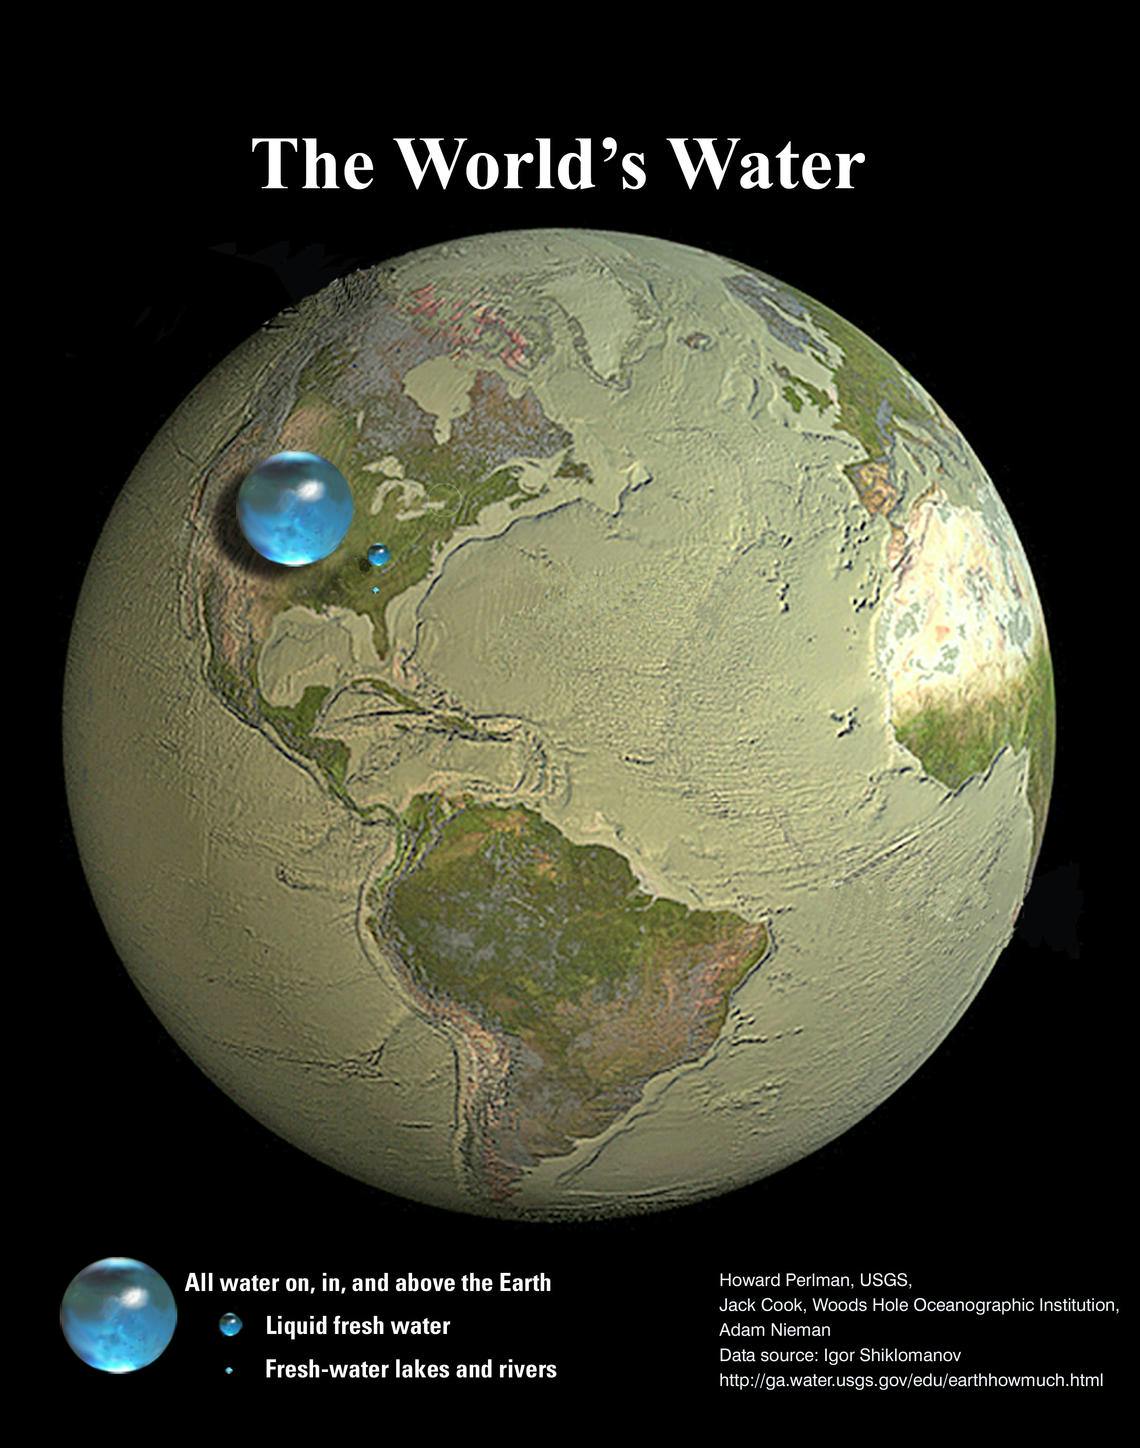 Water Wednesday - Available Fresh Water cover image